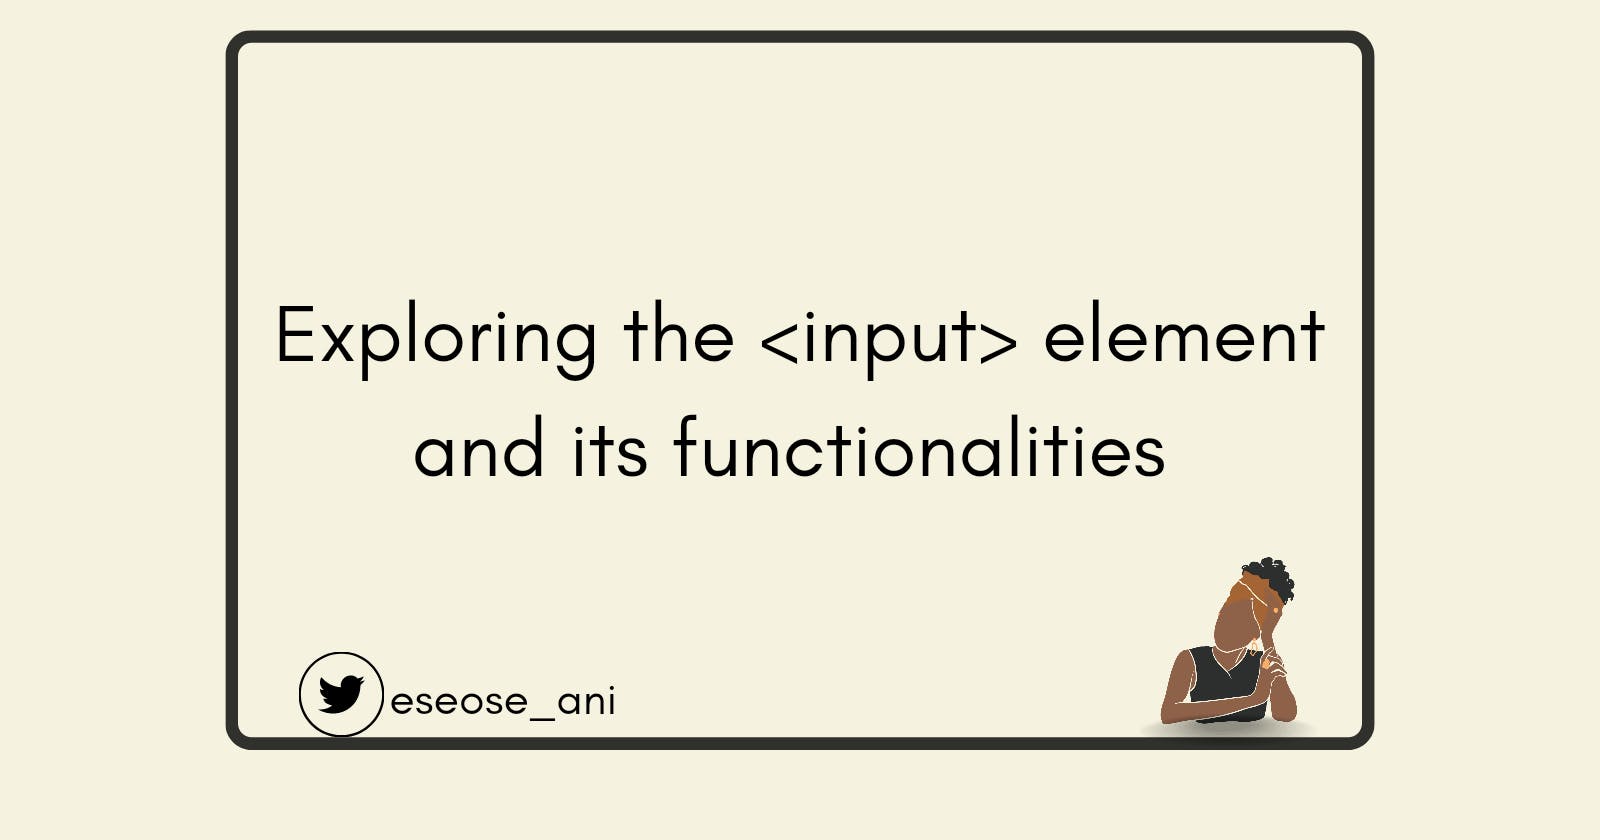 Exploring the <input> element and its functionalities